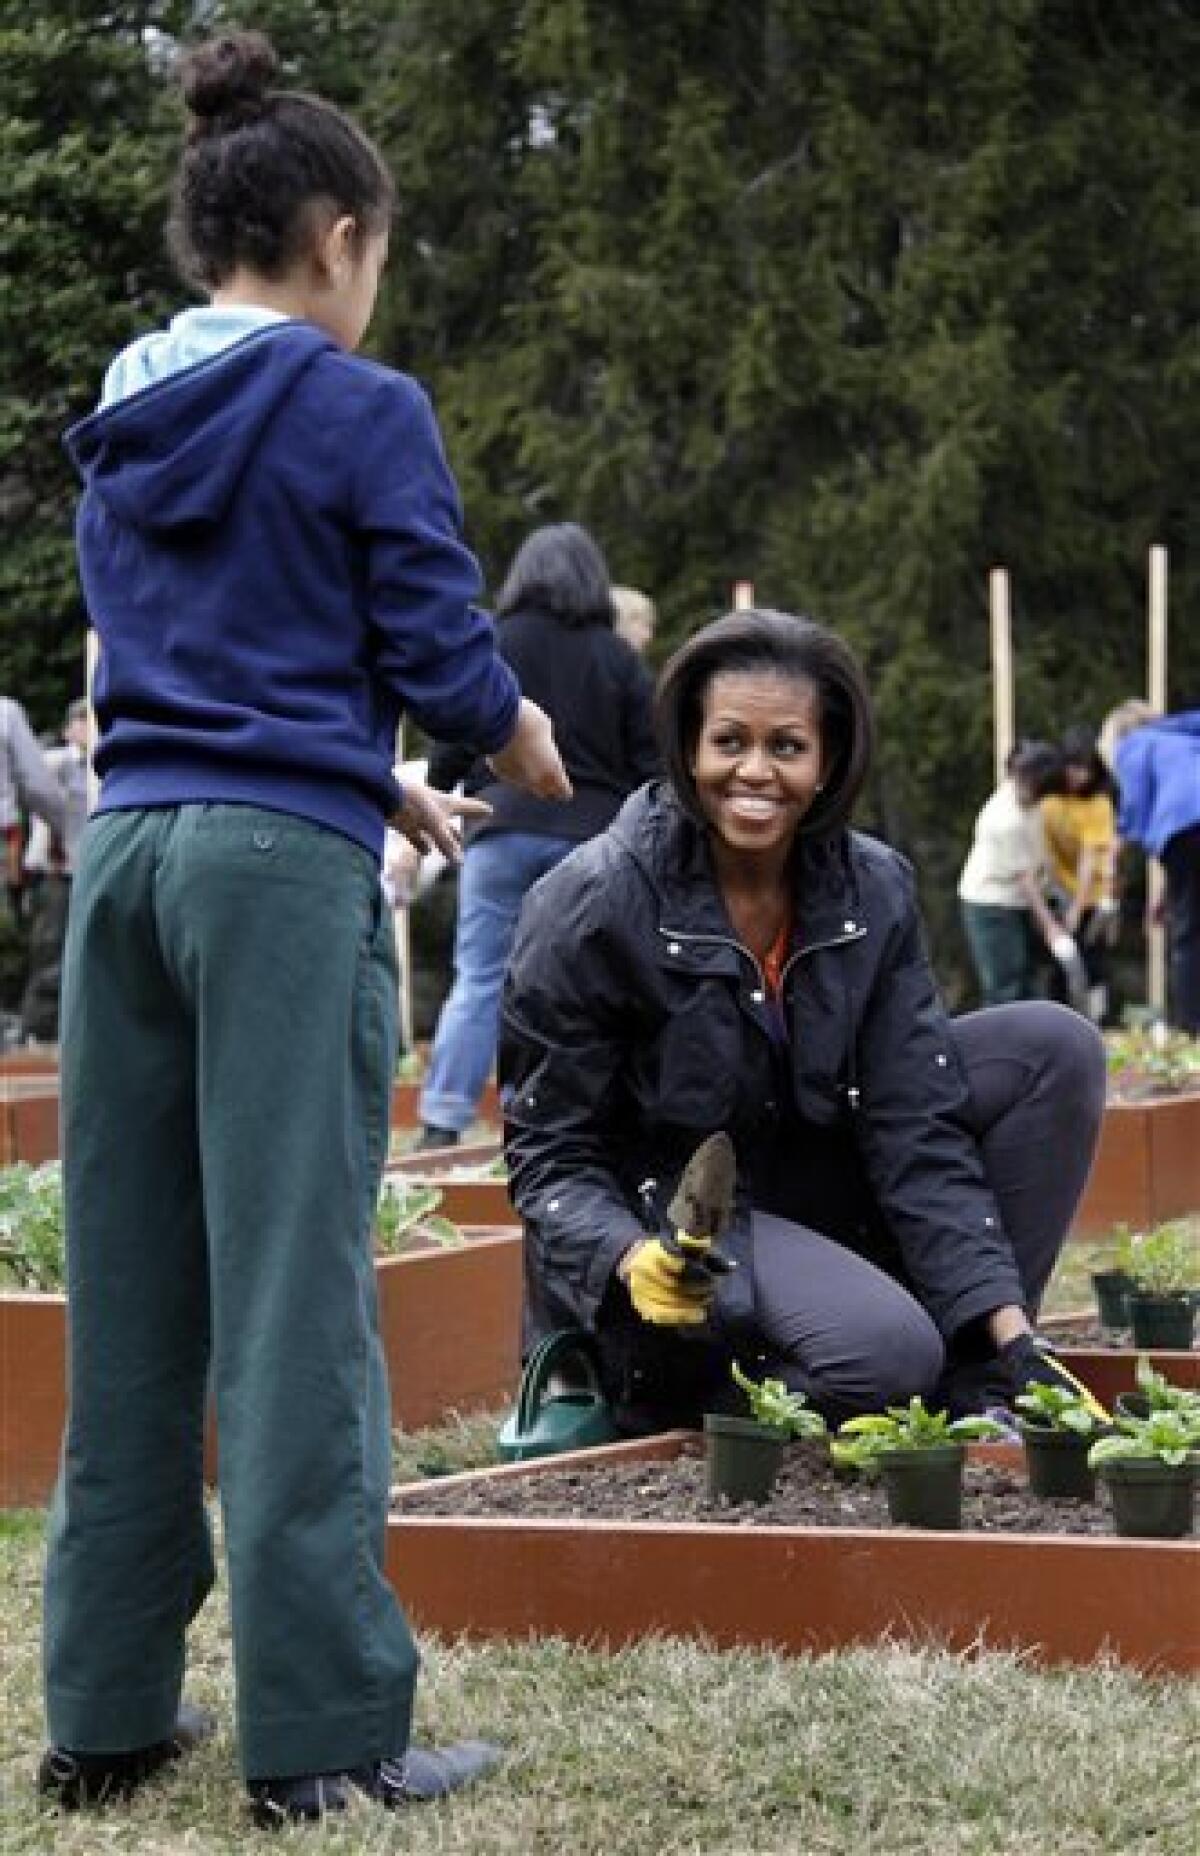 First lady Michelle Obama participates in the third planting of the White House kitchen garden with local school children at the White House, Wednesday, March 16, 2011, in Washington. (AP Photo)